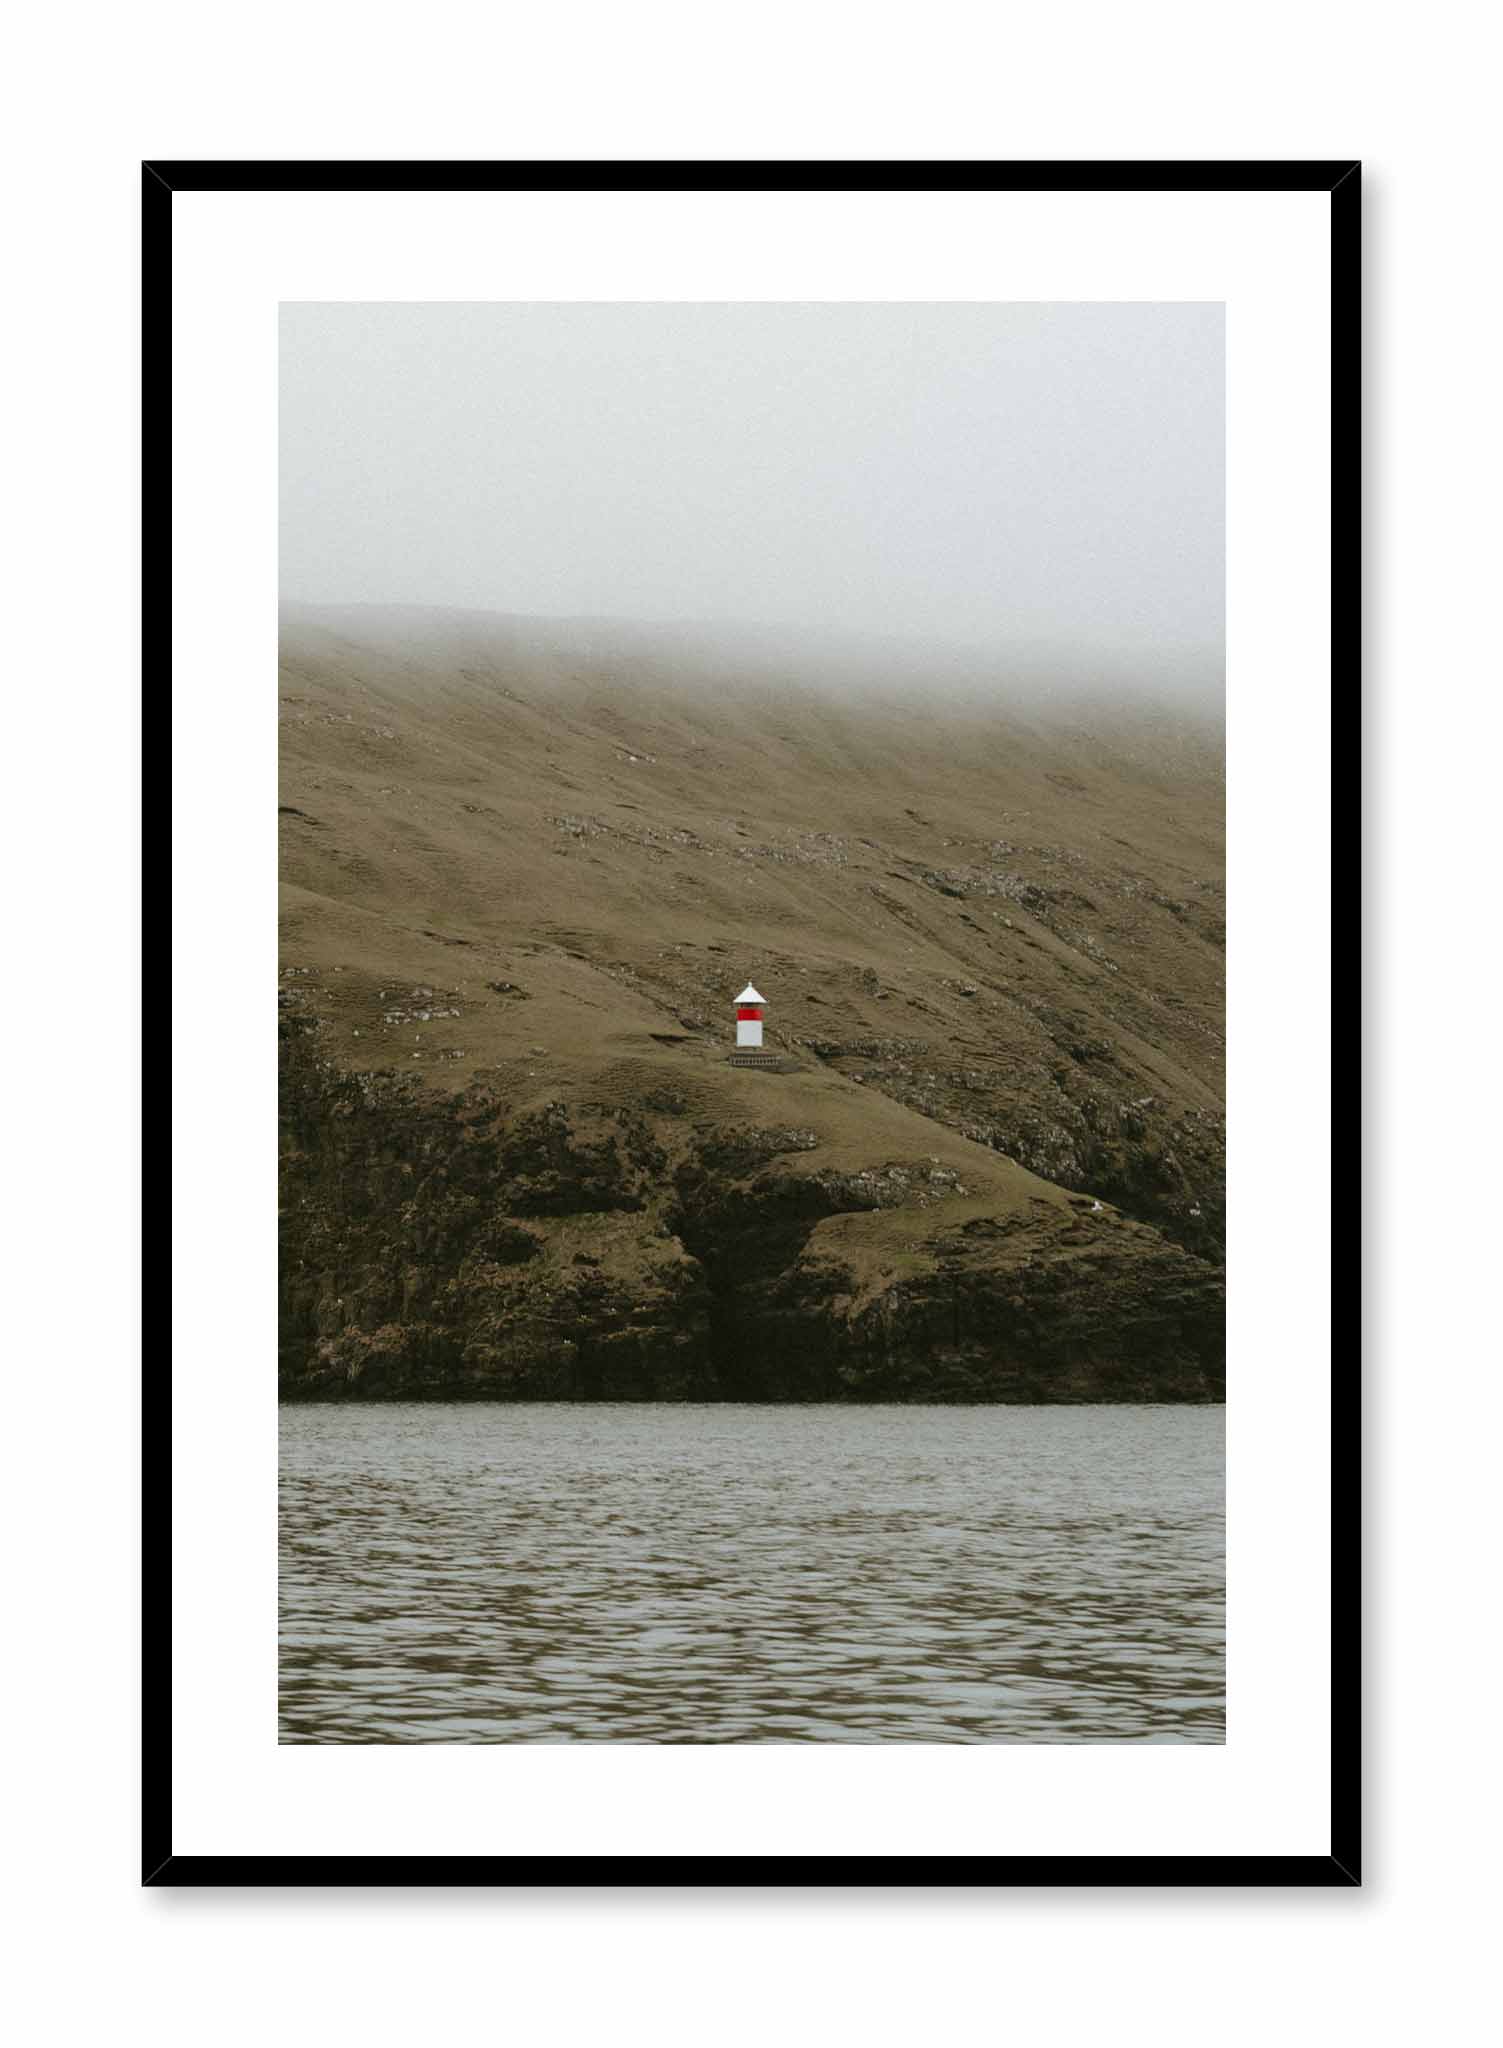 Lone Lighthouse' is a landscape photography poster by Opposite Wall of a red and white lighthouse over foggy lush green hills overlooking the water.